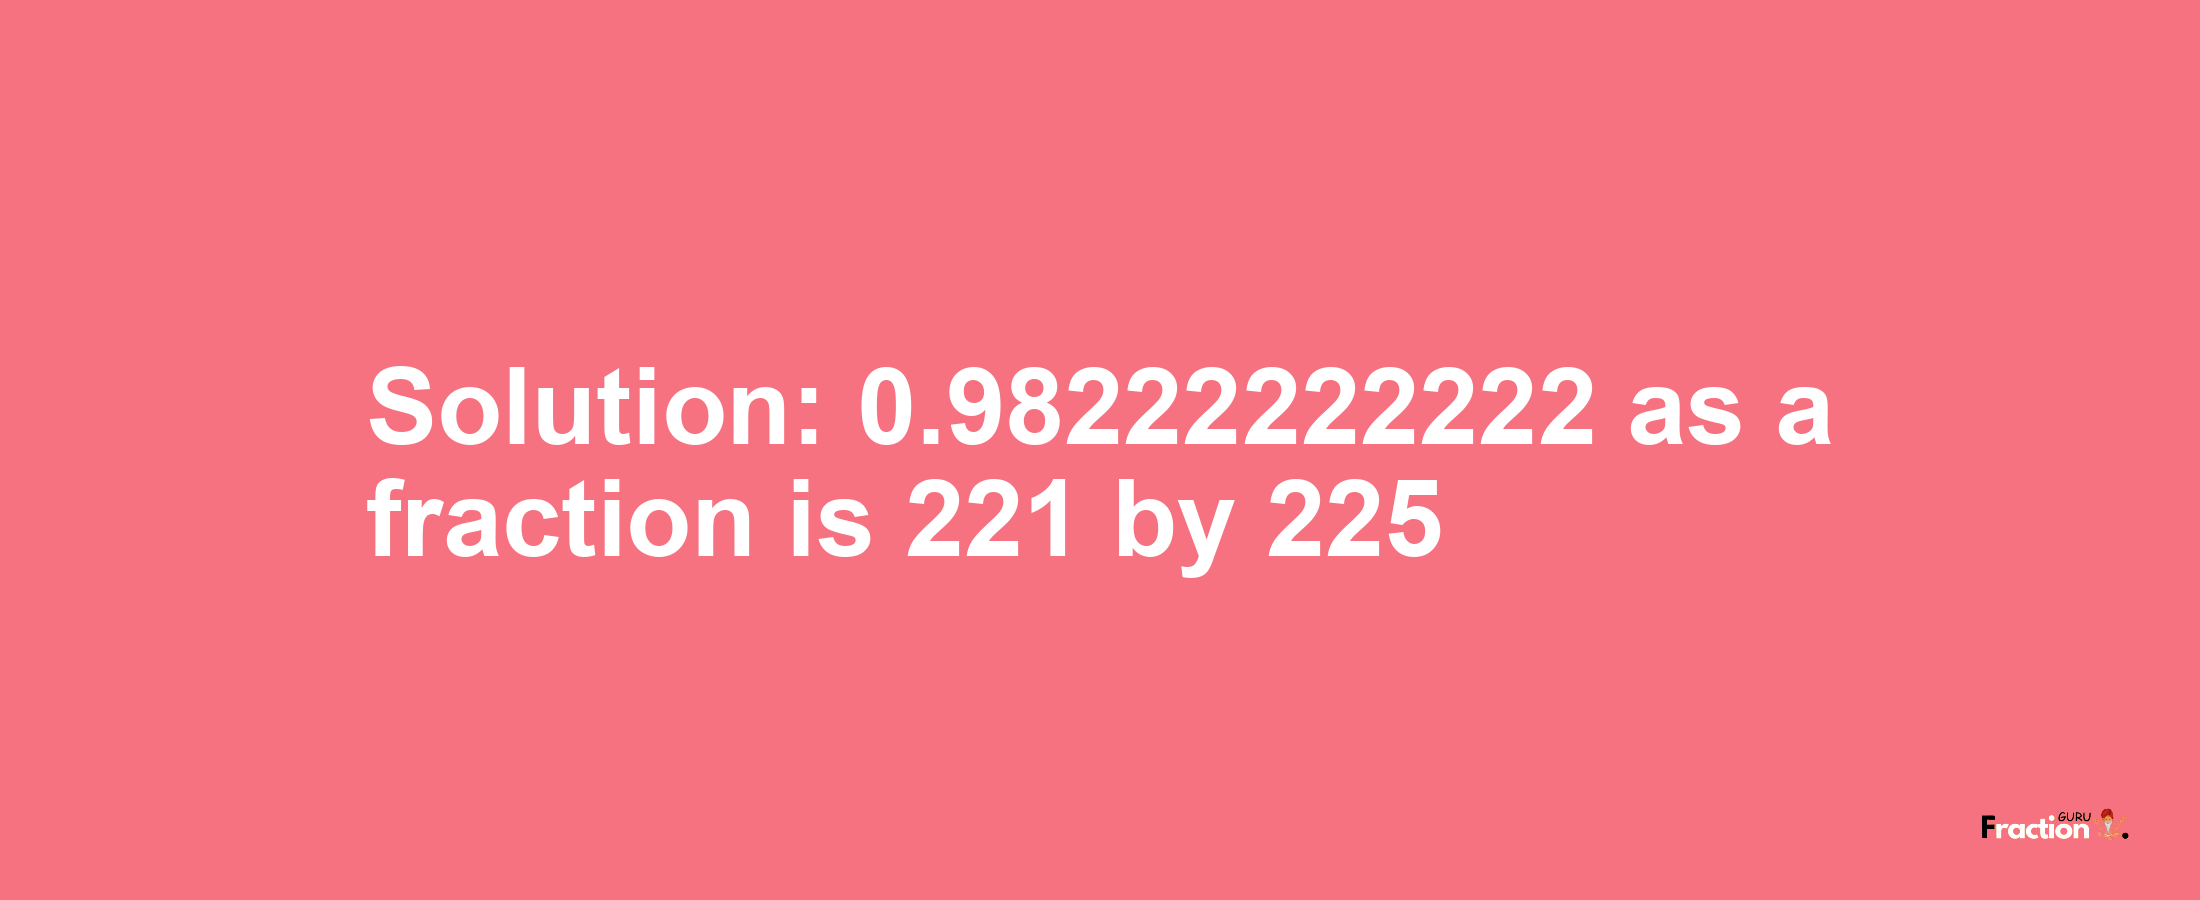 Solution:0.98222222222 as a fraction is 221/225